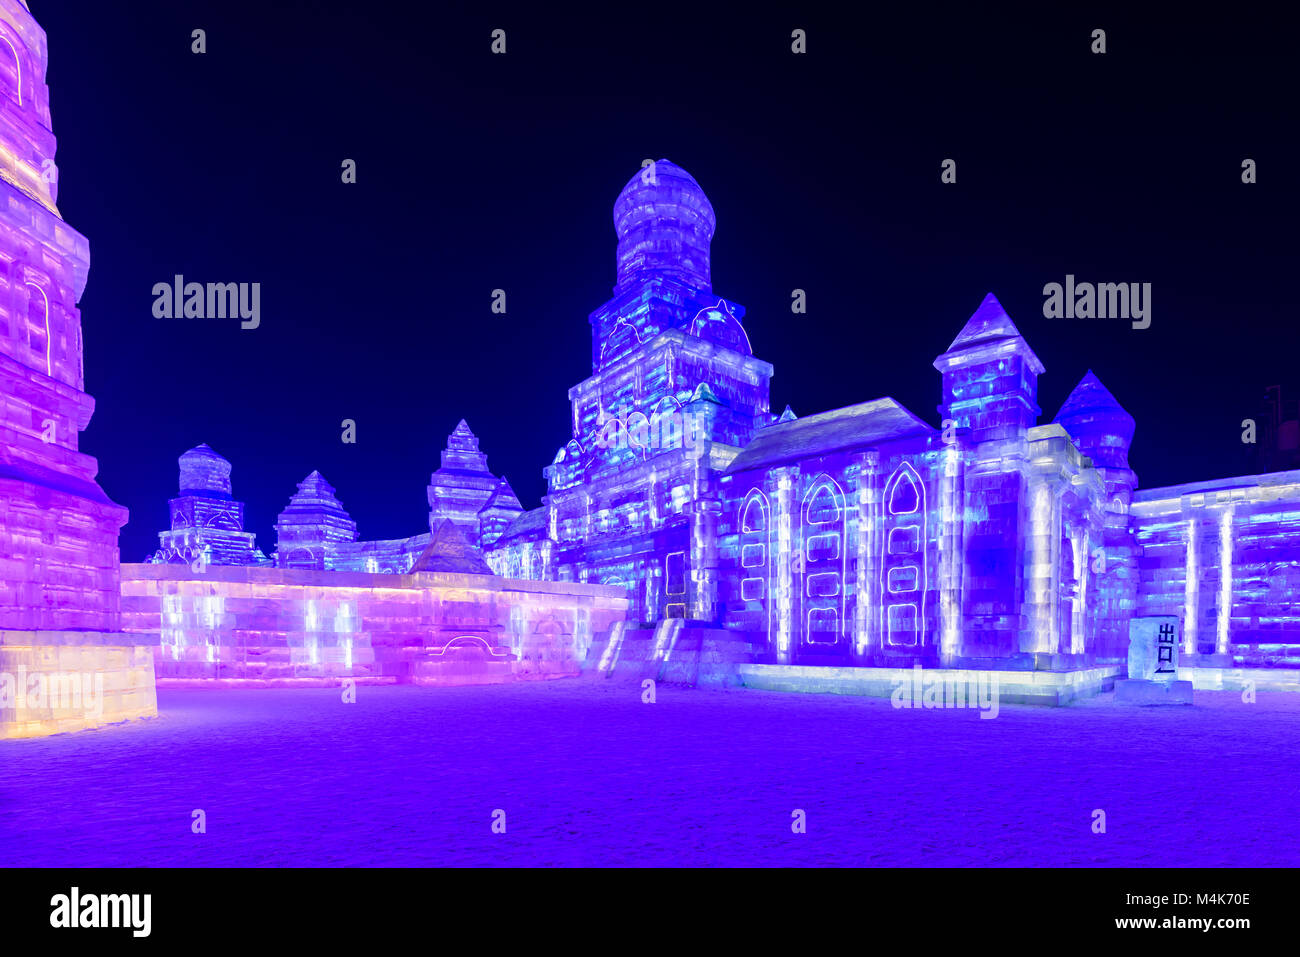 Harbin, Heilongjiang, China is host to world renown Ice Sculpture Festival that is held every year during winter. Stock Photo